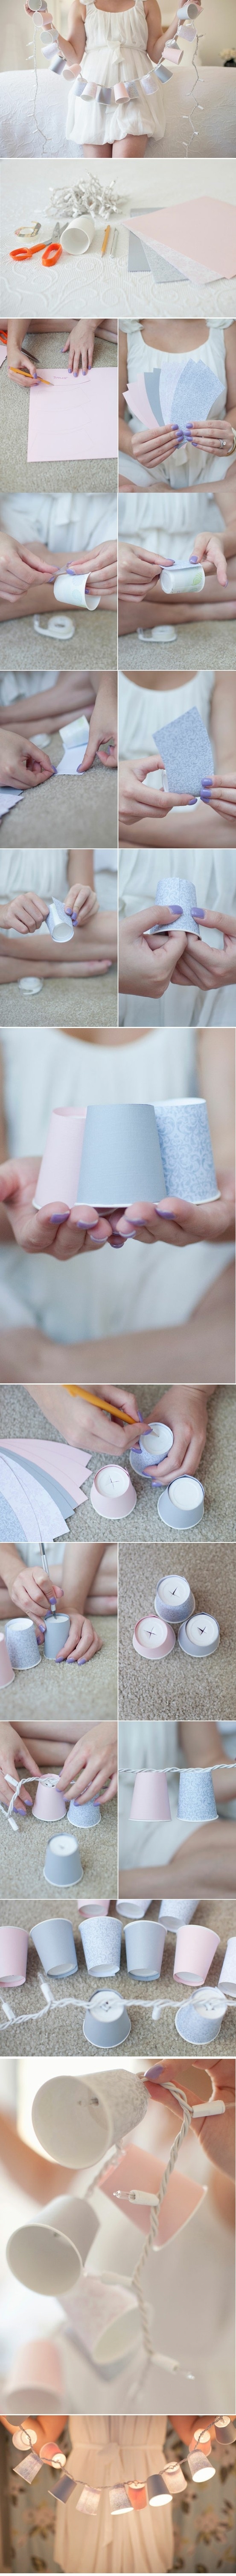 Cover dixie cups with fancy paper to make small shades for string lights.